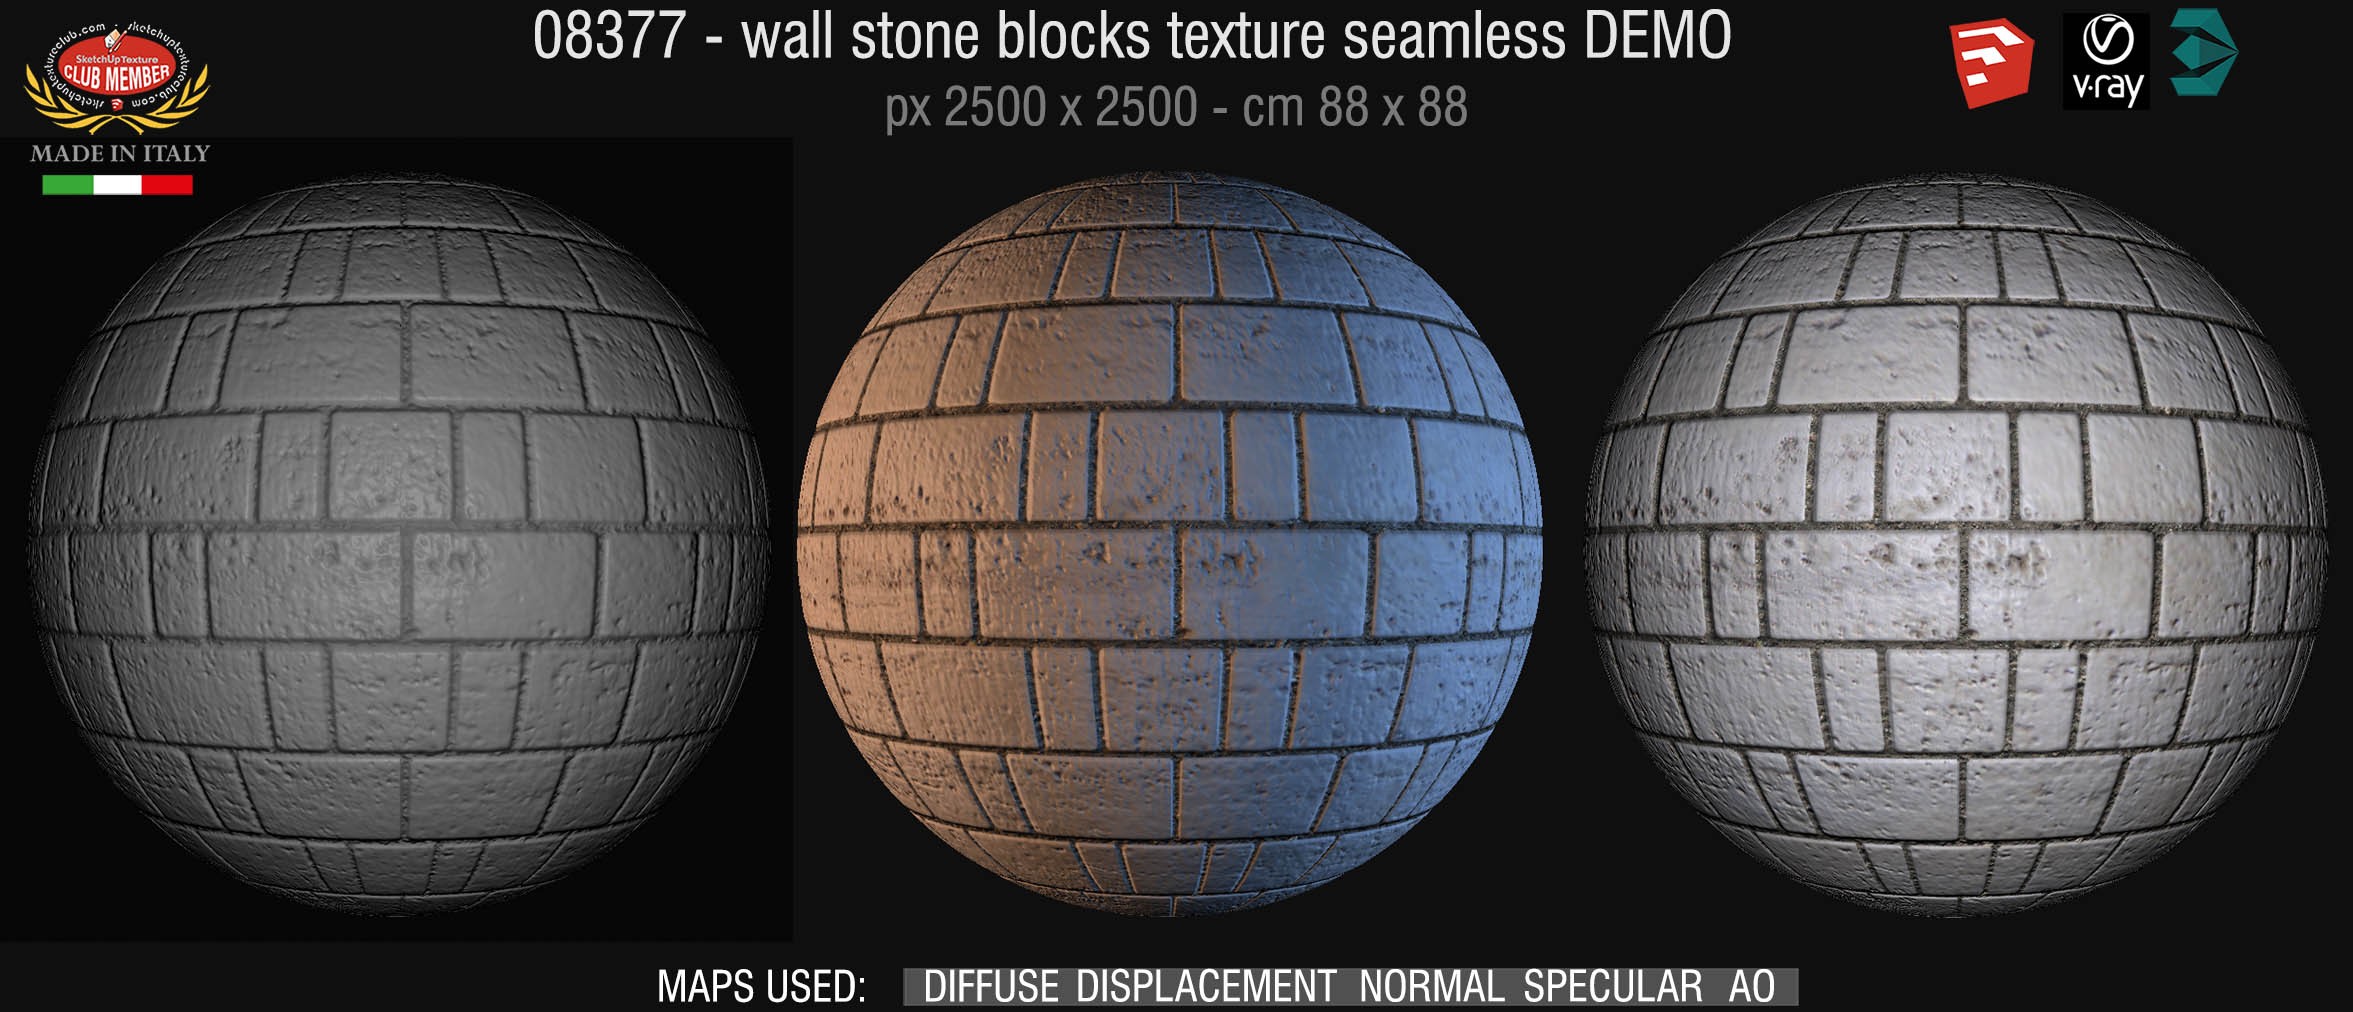 08377 HR Wall stone with regular blocks texture + maps DEMO